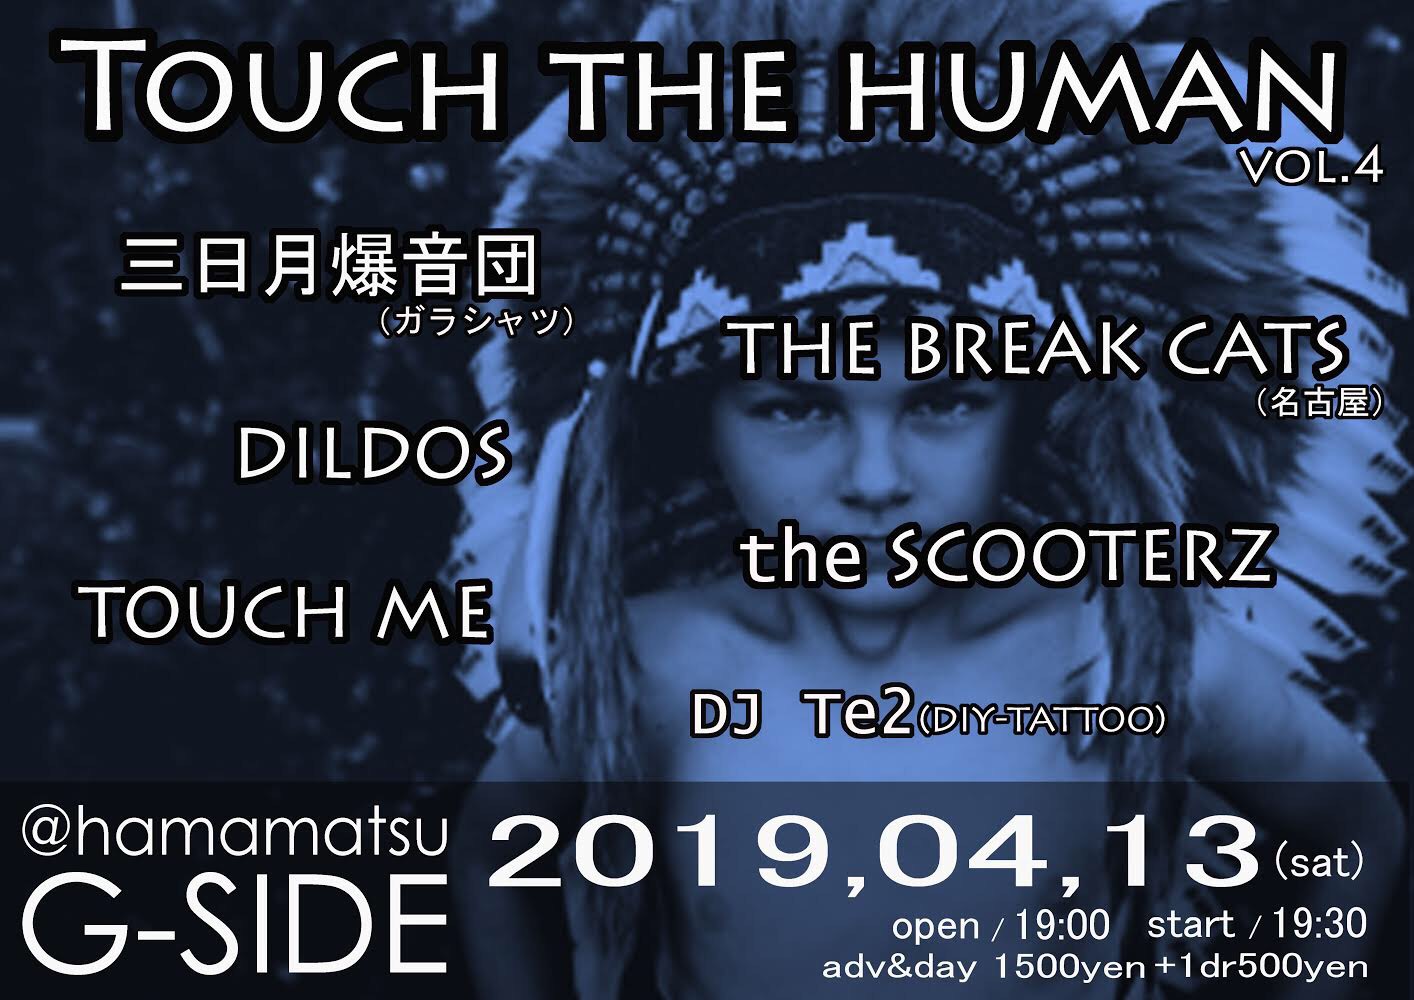 TOUCH THE HUMAN vol.4